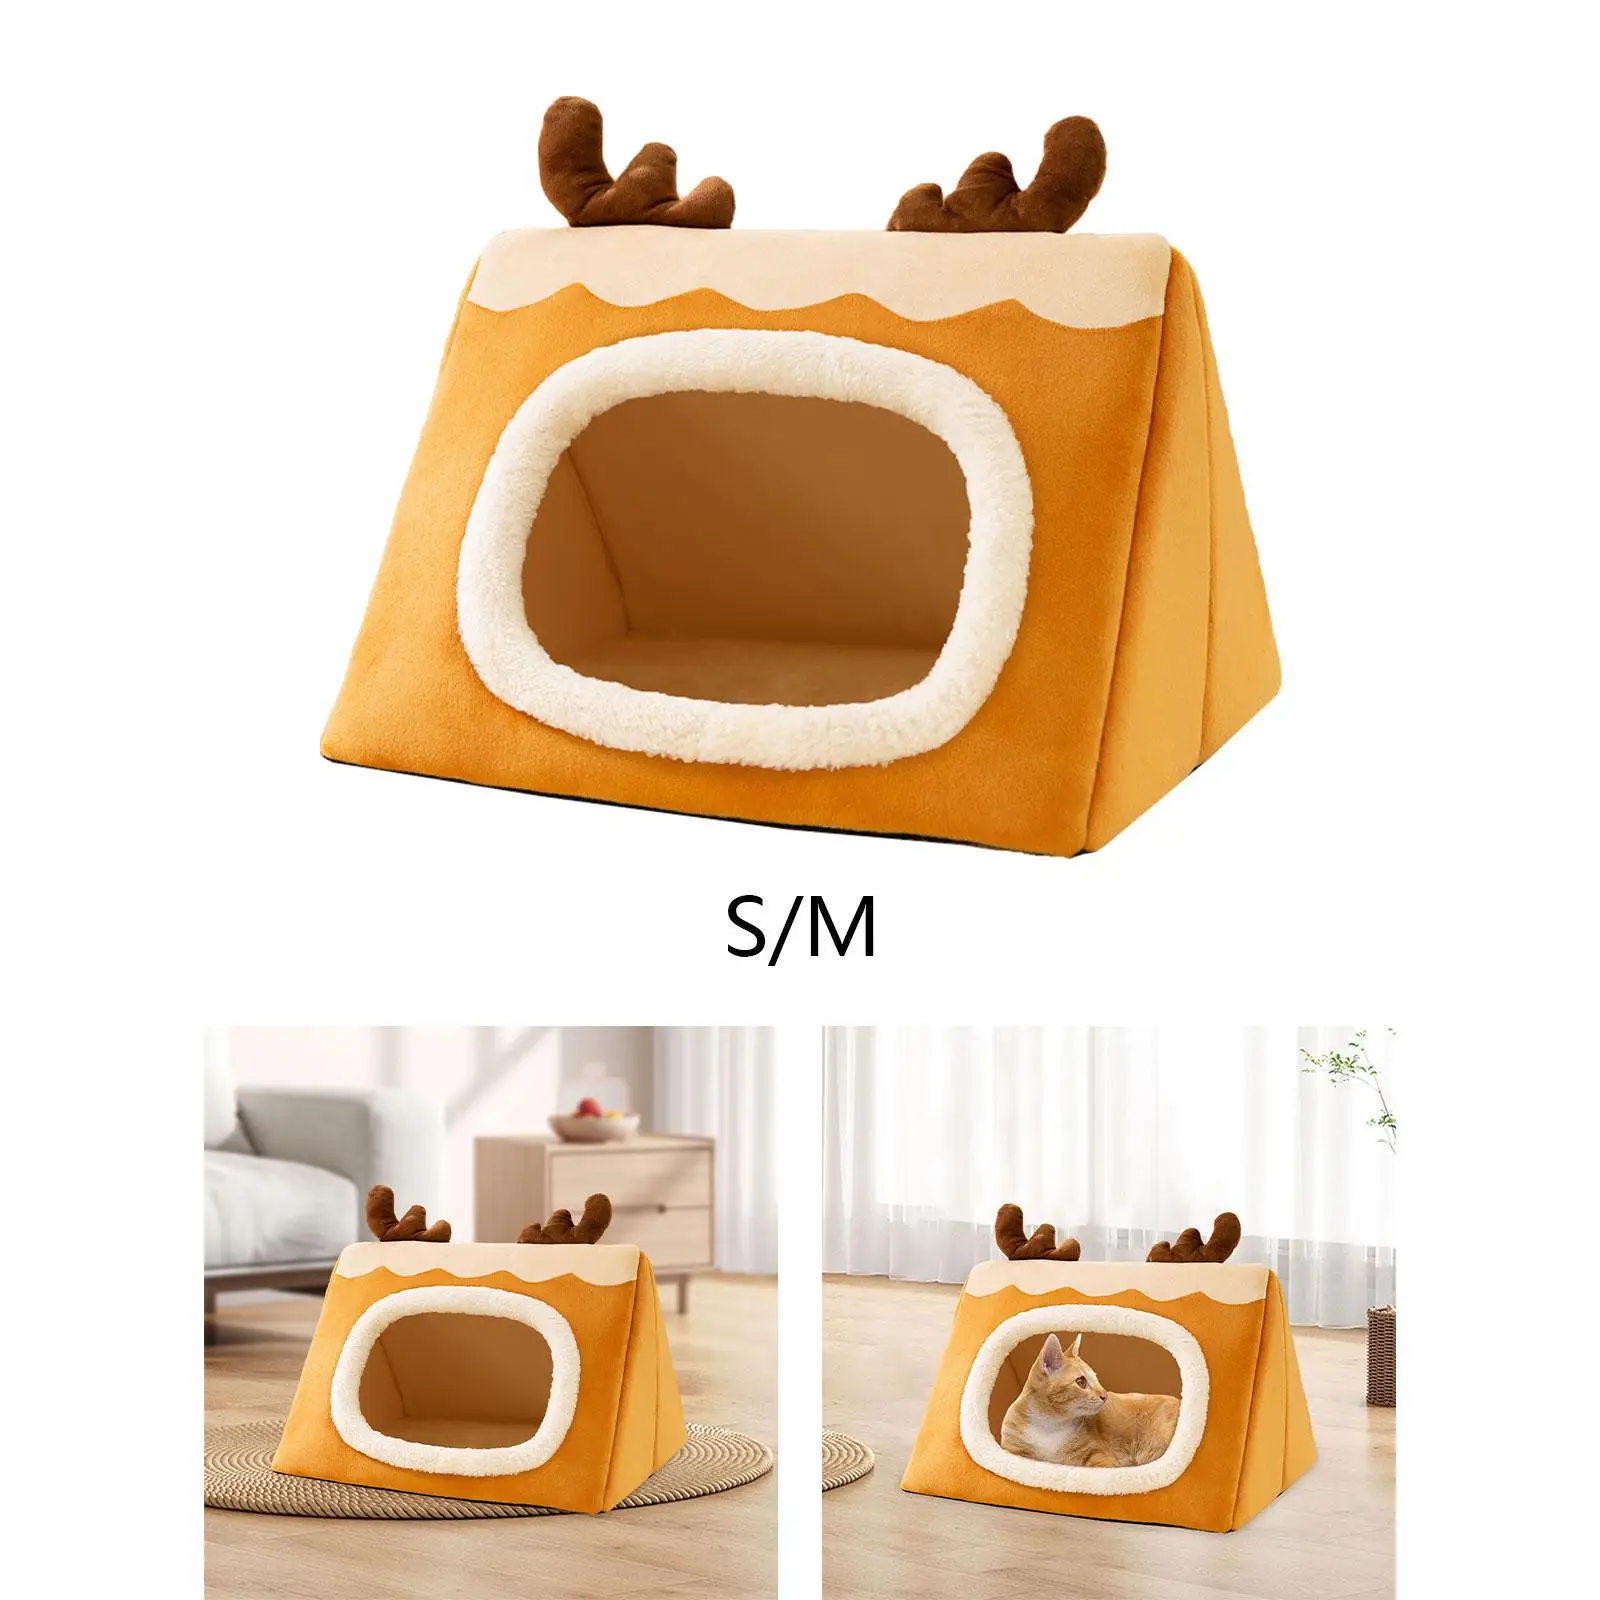 Semi Enclosed Warm Pet House Pet Sleeping Bed for Outdoor Small Animals Home